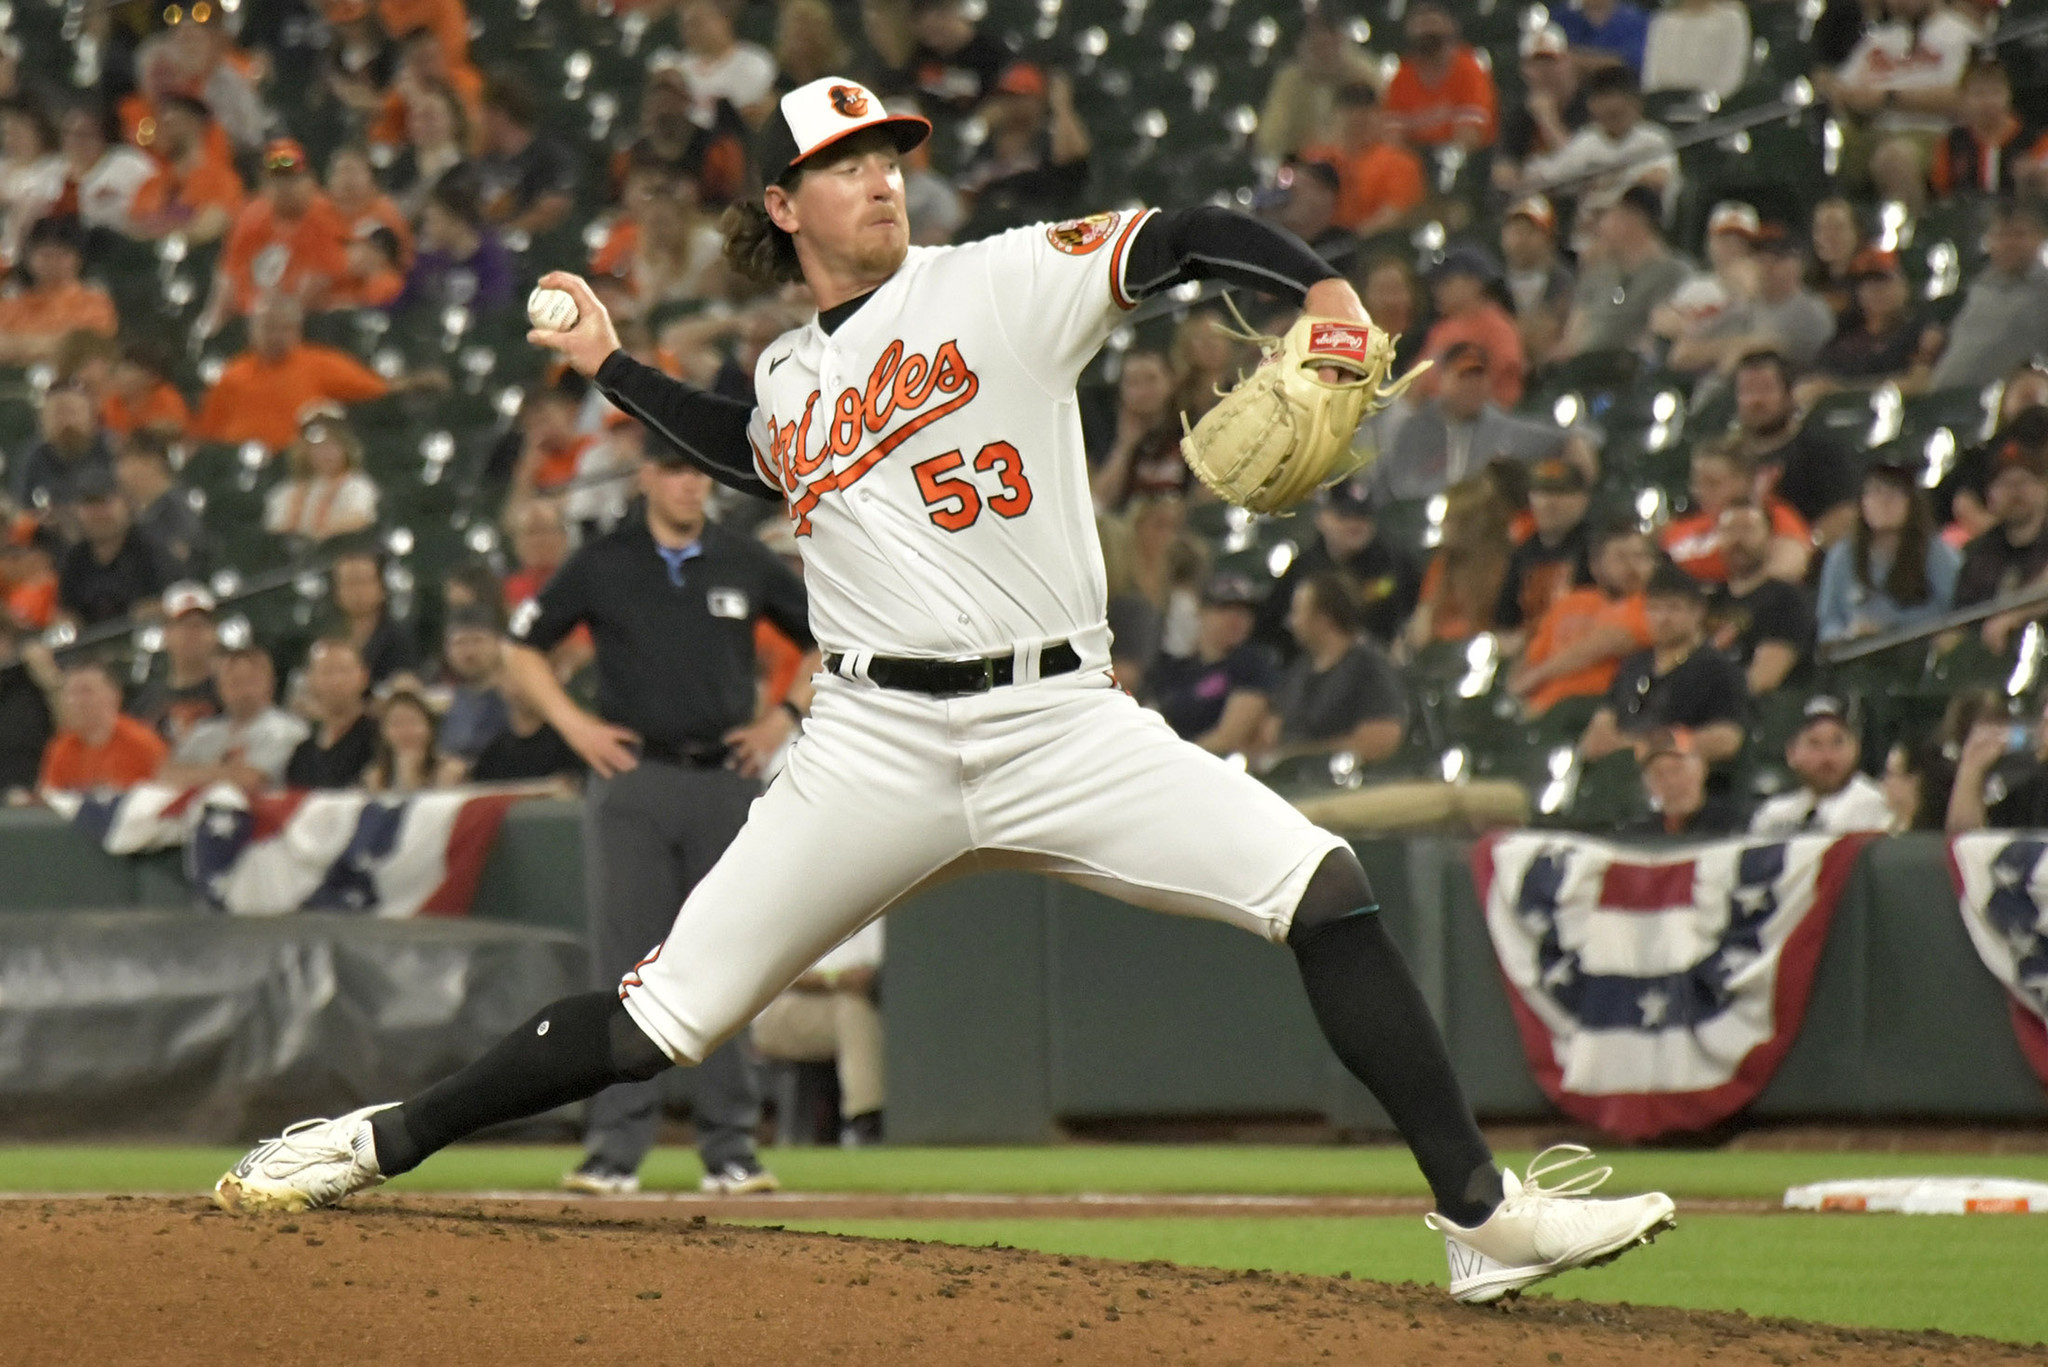 Orioles RHP Dean Kremer Working To Rely On 'Bread And Butter' Curveball  More - PressBox